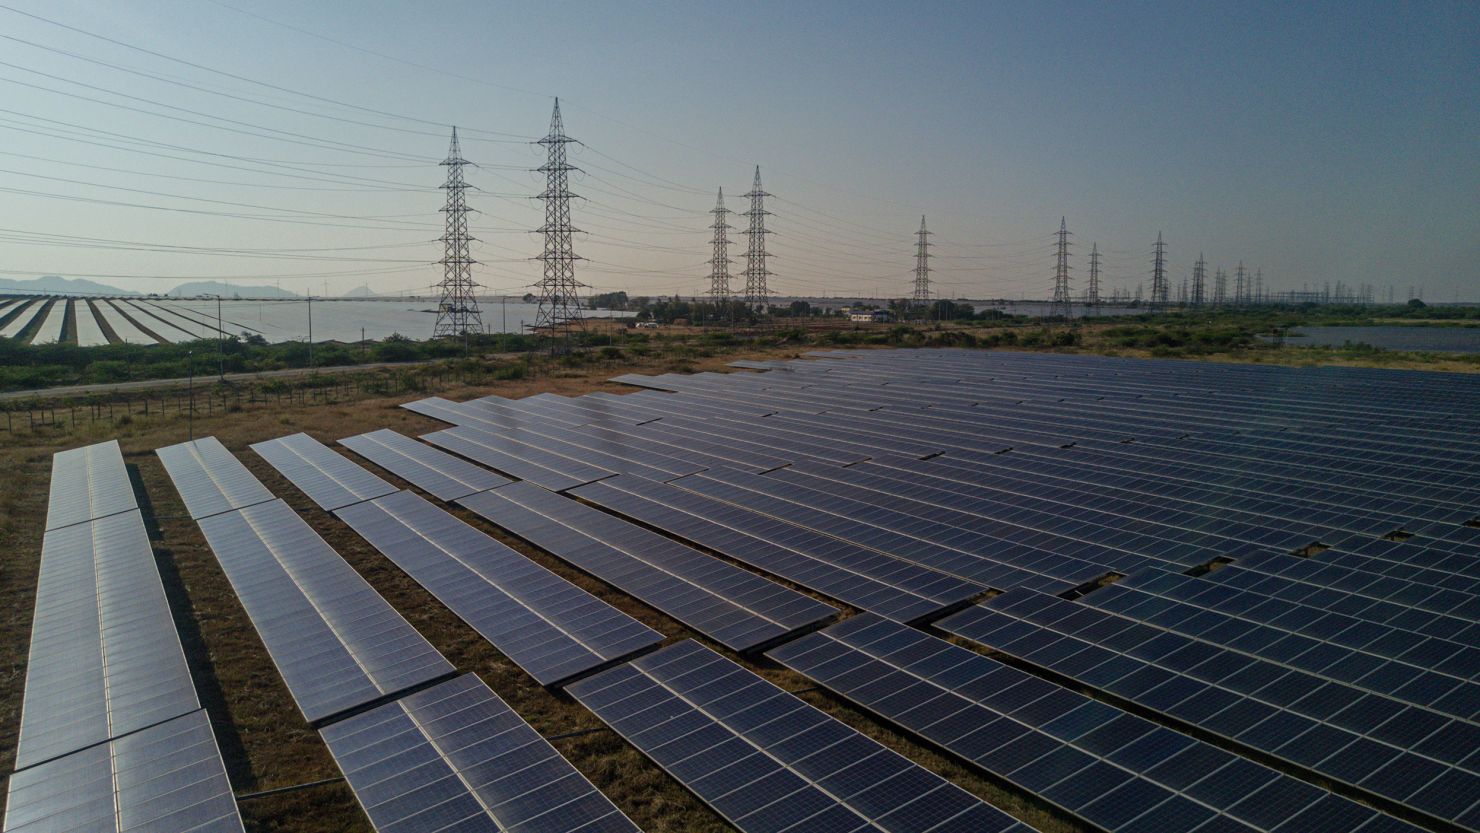 Photovoltaic panels at a solar farm in Pavagada, which is in the southern state of Karnataka.